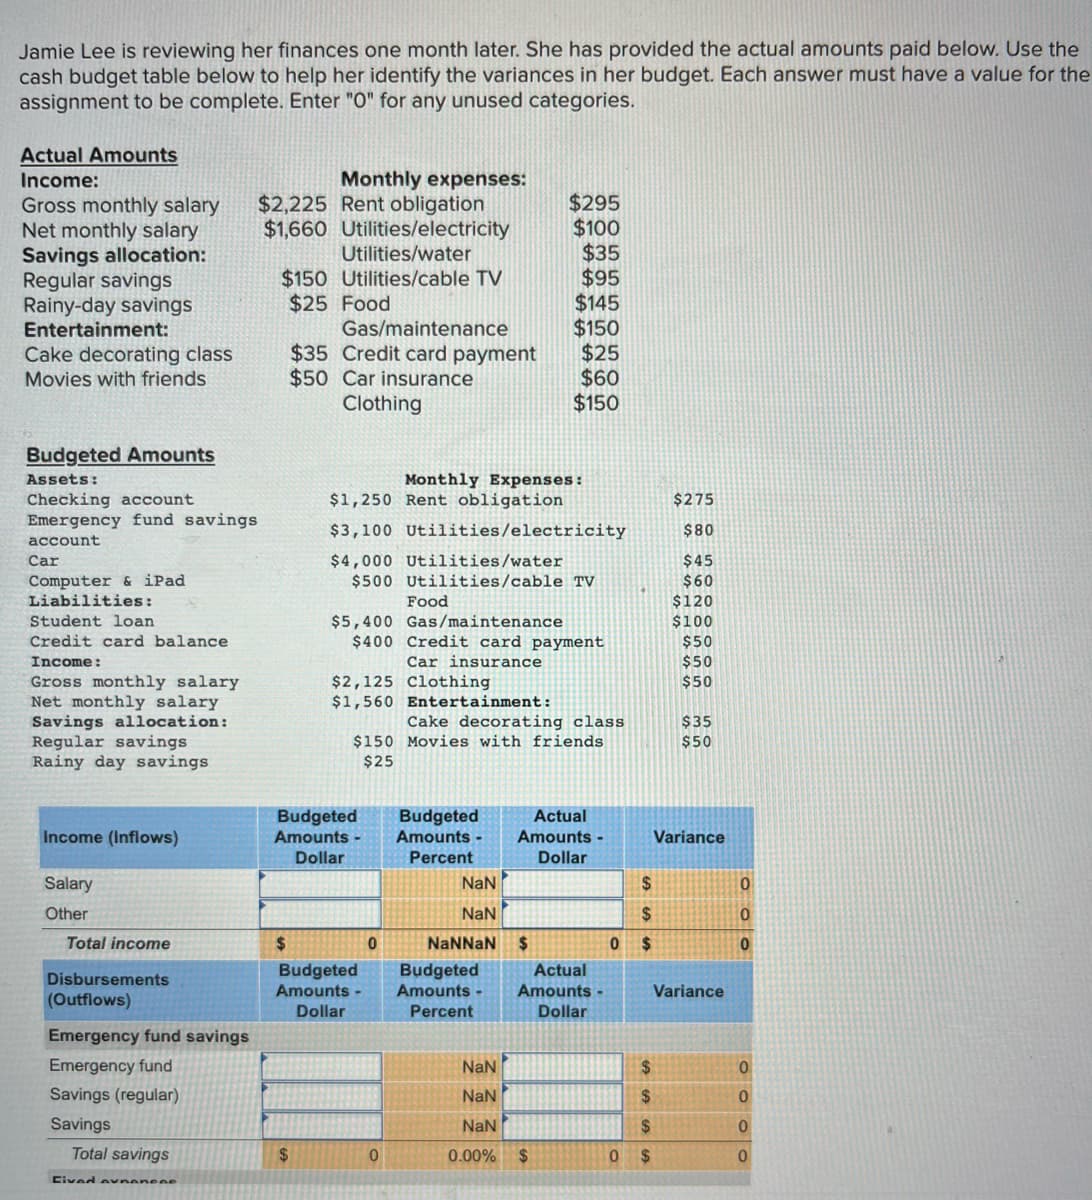 Jamie Lee is reviewing her finances one month later. She has provided the actual amounts paid below. Use the
cash budget table below to help her identify the variances in her budget. Each answer must have a value for the
assignment to be complete. Enter "O" for any unused categories.
Actual Amounts
Income:
$1,660
Gross monthly salary $2,225
Net monthly salary
Savings allocation:
Regular savings
Rainy-day savings
Entertainment:
Cake decorating class
Movies with friends
Budgeted Amounts
Assets:
Checking account
Emergency fund savings
account
Car
Computer & iPad
Liabilities:
Student loan
Credit card balance
Income:
Gross monthly salary
Net monthly salary
Savings allocation:
Regular savings
Rainy day savings
Income (Inflows)
Salary
Other
Total income
Disbursements
(Outflows)
Emergency fund savings
Emergency fund
Savings (regular)
Savings
Total savings
Fived avnanene
Monthly expenses:
Rent obligation
Utilities/electricity
Utilities/water
$150 Utilities/cable TV
$25 Food
Gas/maintenance
$35 Credit card payment
$50 Car insurance
Clothing
$
Monthly Expenses:
$1,250 Rent obligation
$3,100 Utilities/electricity
$4,000 Utilities/water
$500 Utilities/cable TV
$5,400 Gas/maintenance
$400 Credit card payment
Car insurance
$2,125 Clothing
$1,560 Entertainment:
Budgeted
Amounts -
Dollar
$
Budgeted
Amounts -
Dollar
Food
Cake decorating class
$150 Movies with friends
$25
0
0
$295
$100
$35
$95
$145
$150
$25
$60
$150
Budgeted
Actual
Amounts - Amounts -
Percent
Dollar
NaN
NaN
NaNNaN $
Budgeted
Amounts -
Percent
NaN
NaN
NaN
0.00%
Actual
Amounts -
Dollar
$
0
0
$
$
$
$
$
$
$
$275
$80
$45
$60
$120
$100
$50
$50
$50
$35
$50
Variance
Variance
0
0
0
0
0
0
0